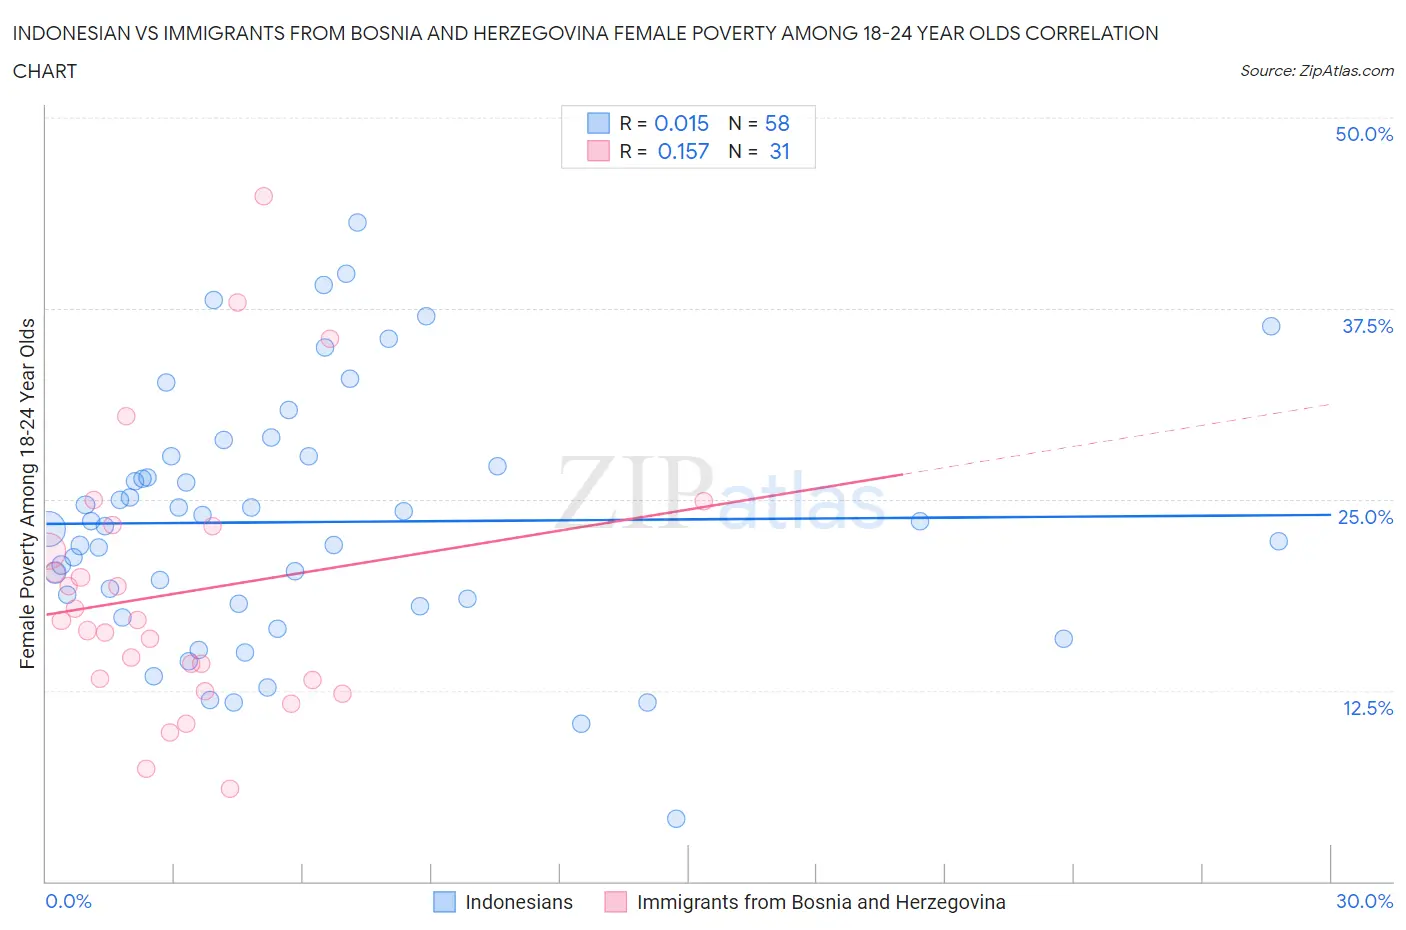 Indonesian vs Immigrants from Bosnia and Herzegovina Female Poverty Among 18-24 Year Olds